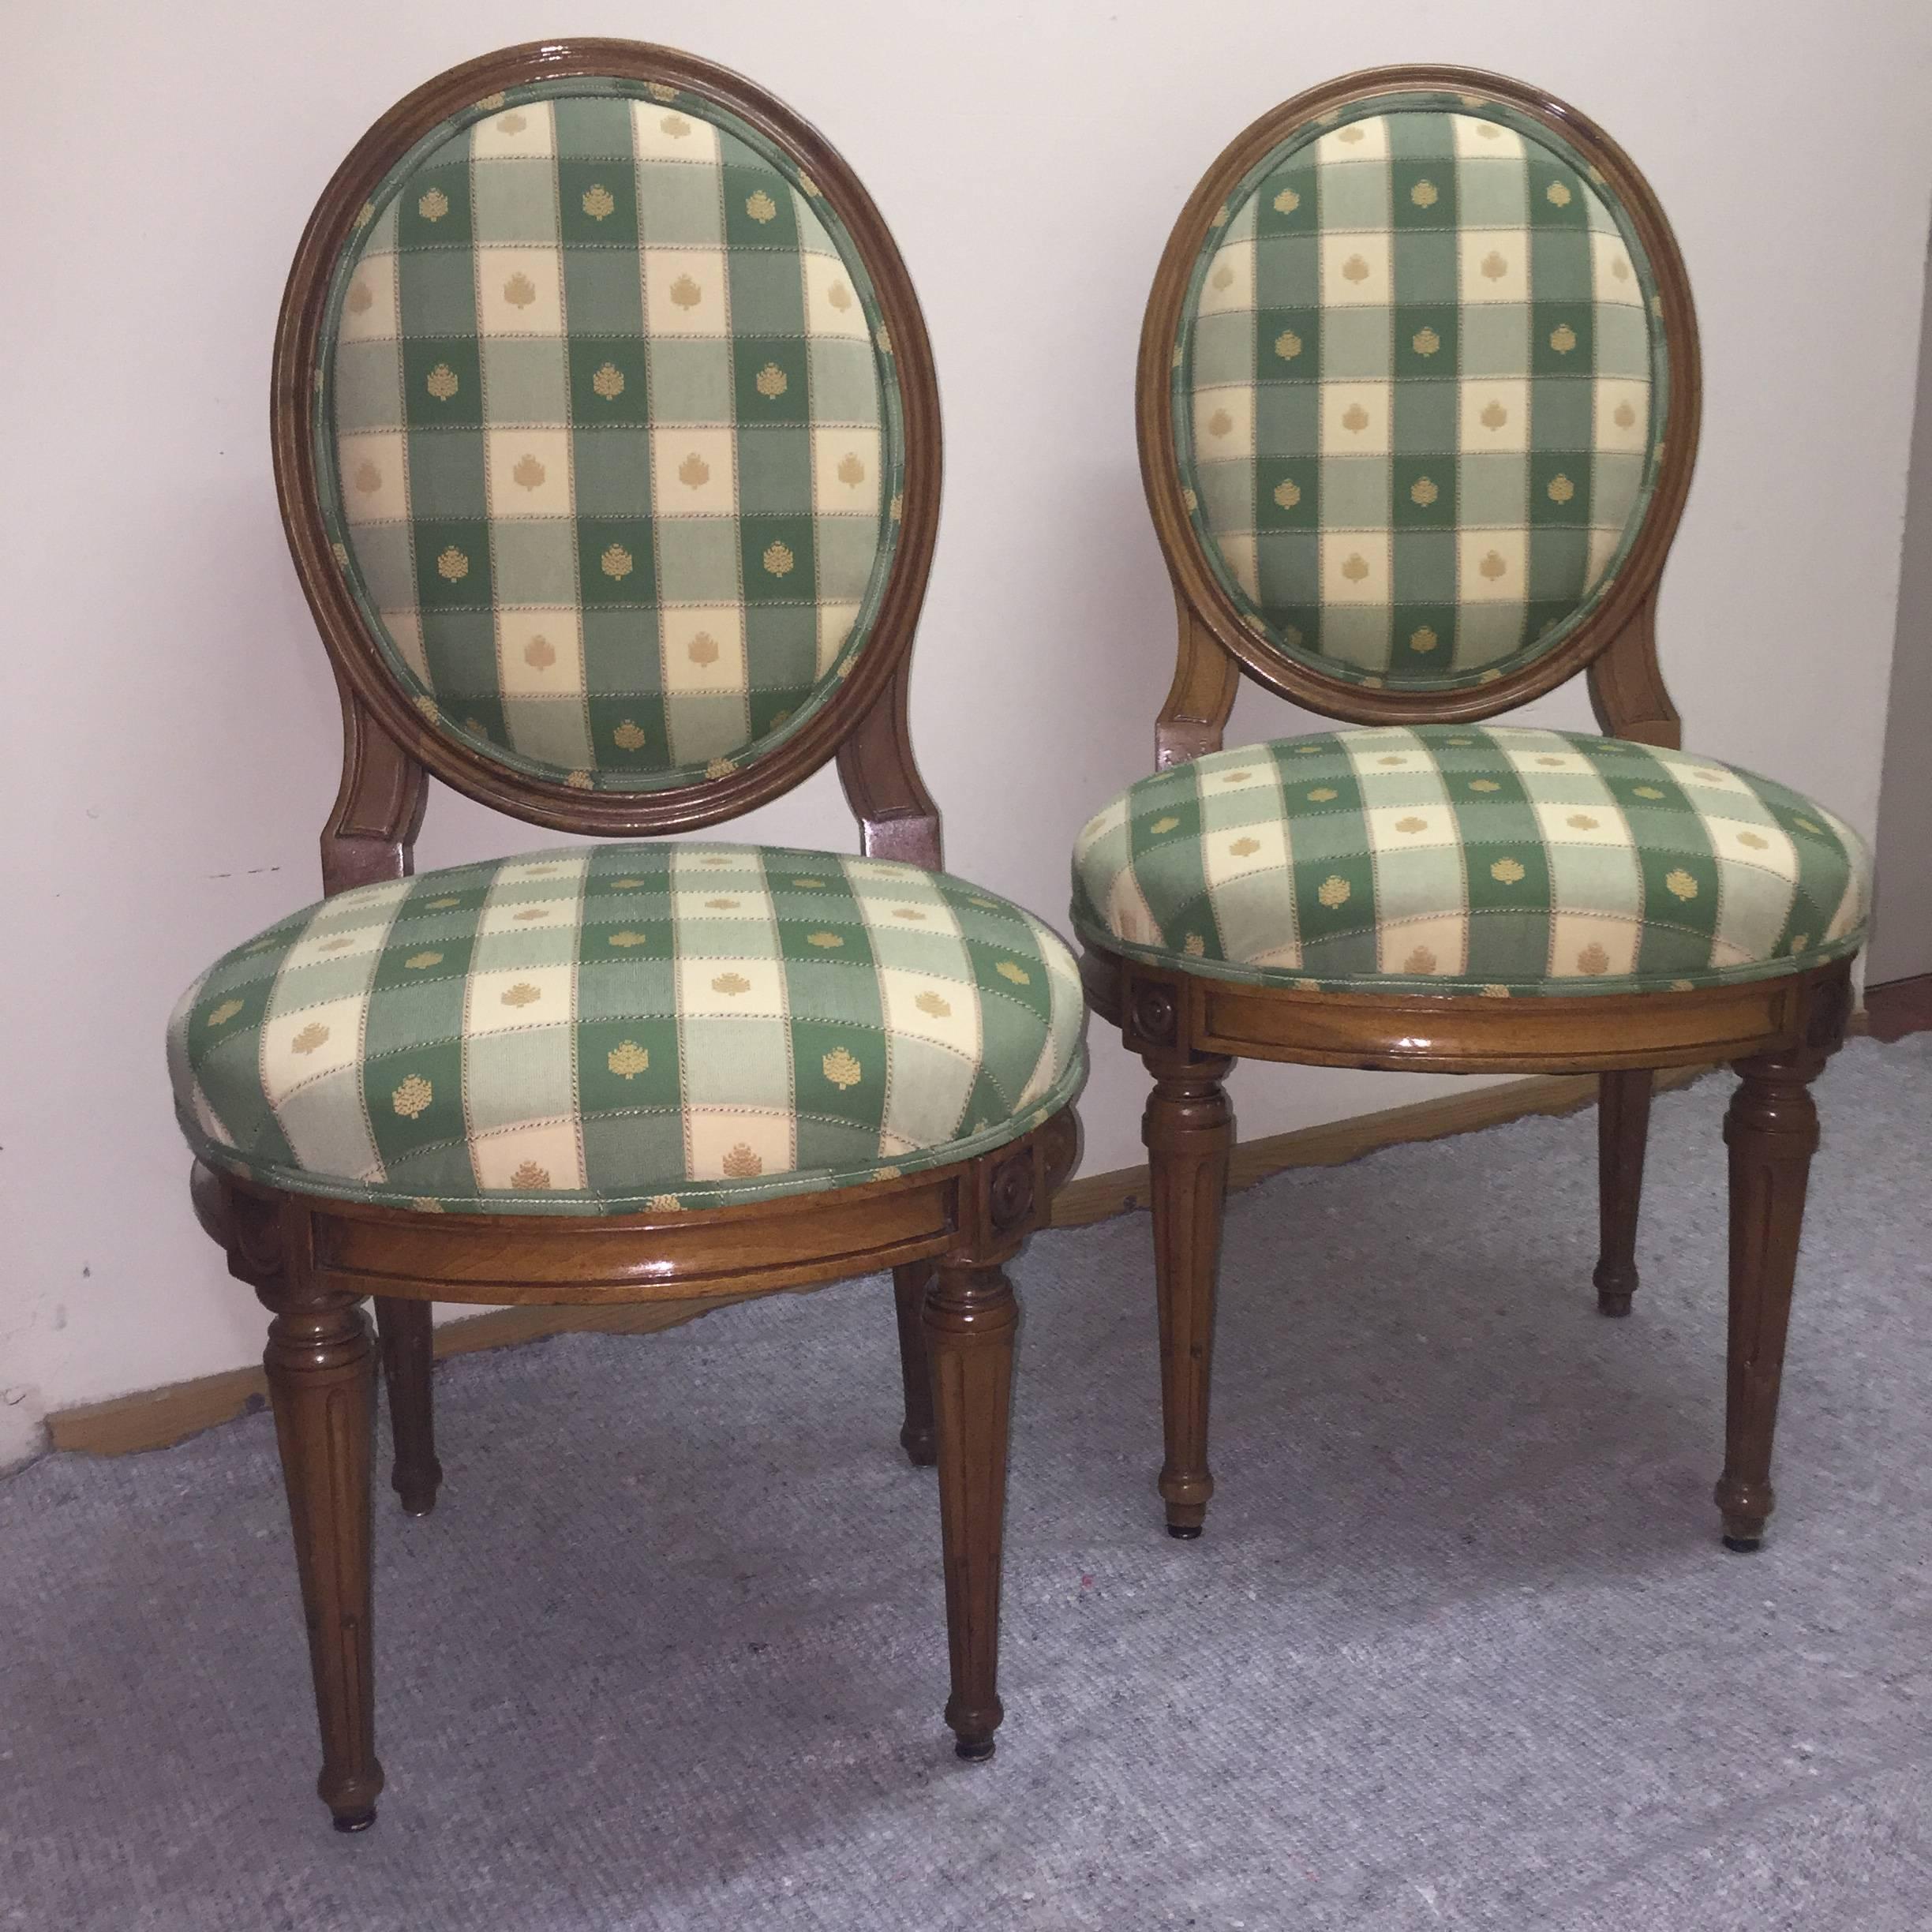 Pair of Louis XVI chairs, end of the 18th century, west of Switzerland. Frame in walnut.